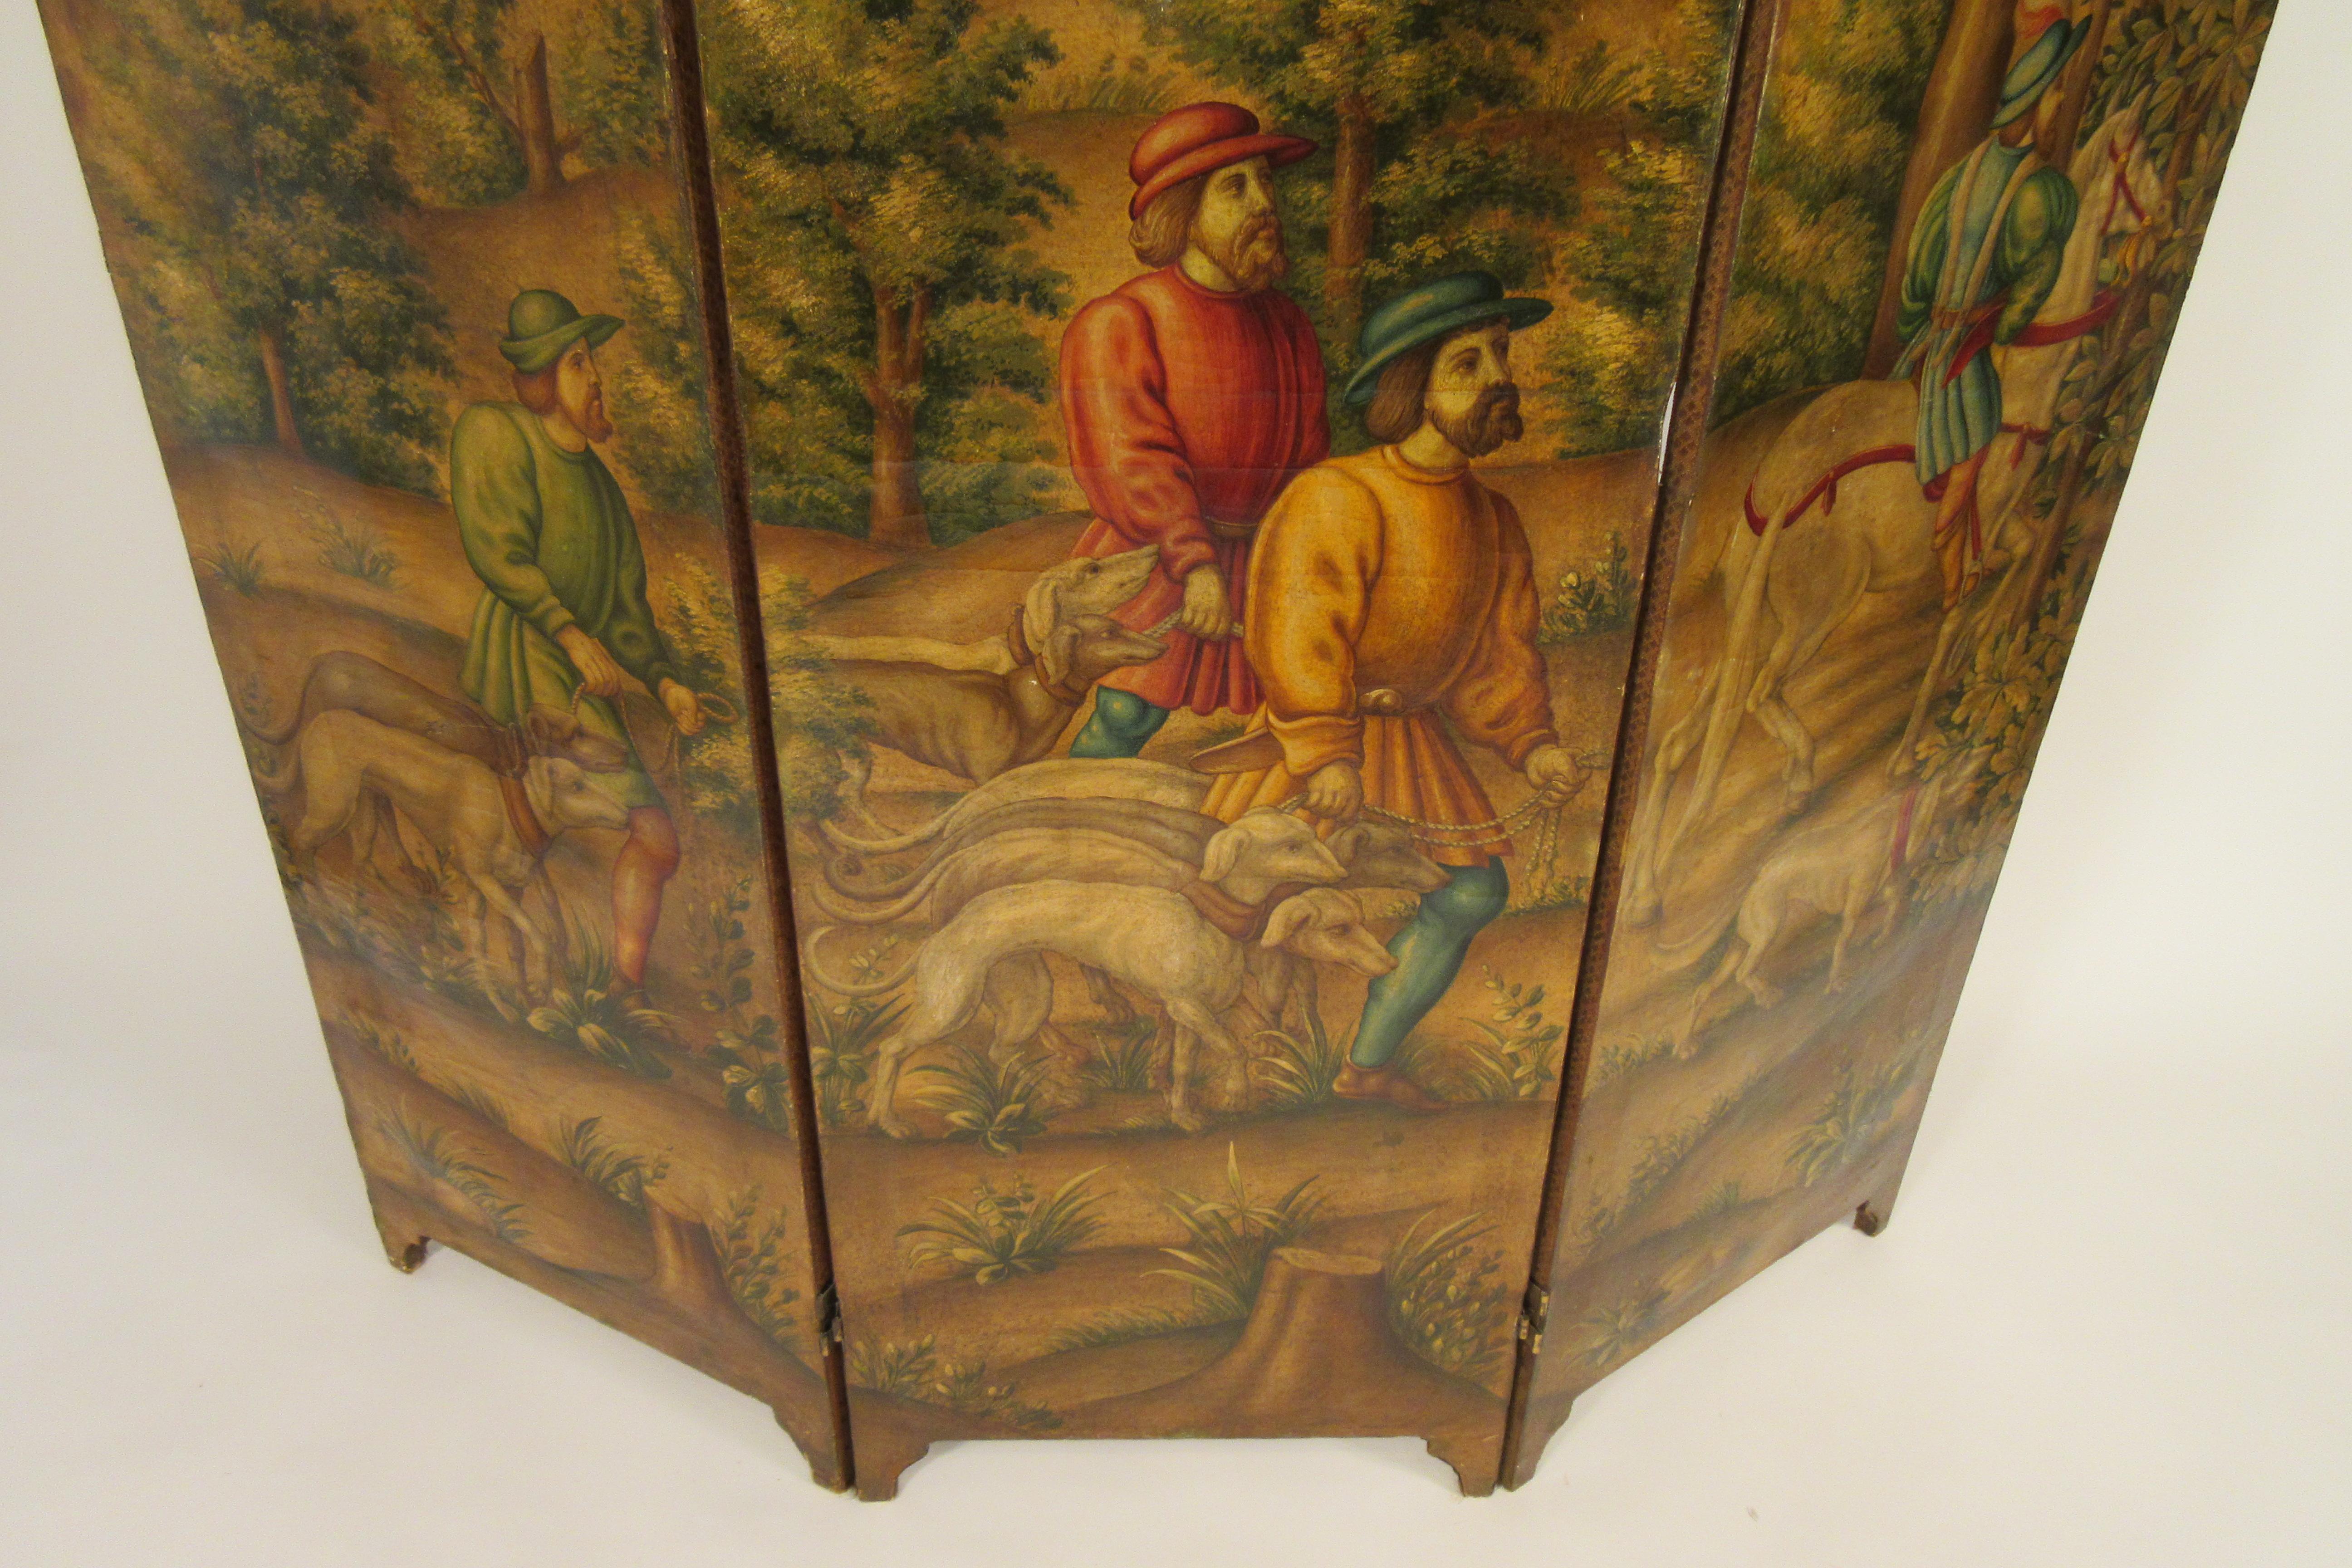 1870s Italian Painted Screen of Hunters on Hoses with Dogs 7